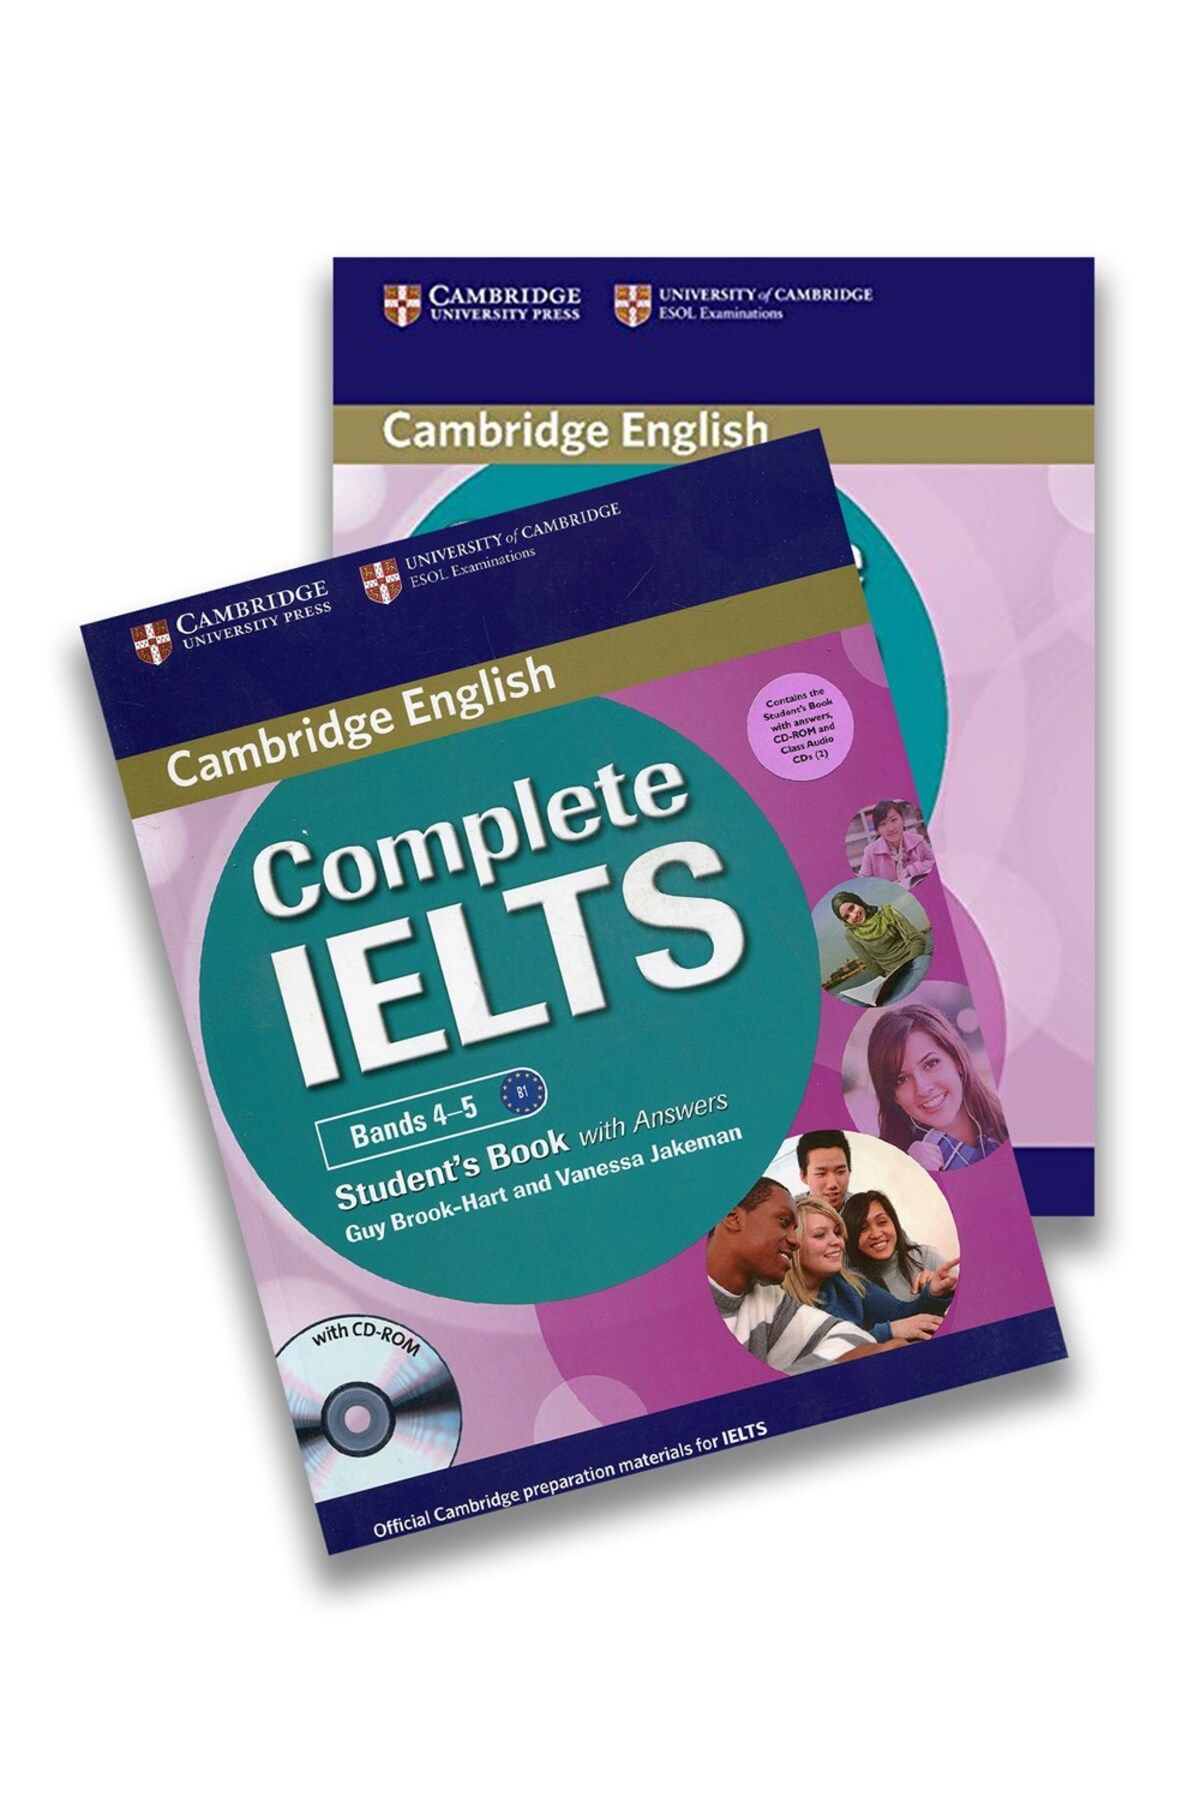 Cambridge University Complete IELTS Bands 4-5 Student's Book, Workbook and CD